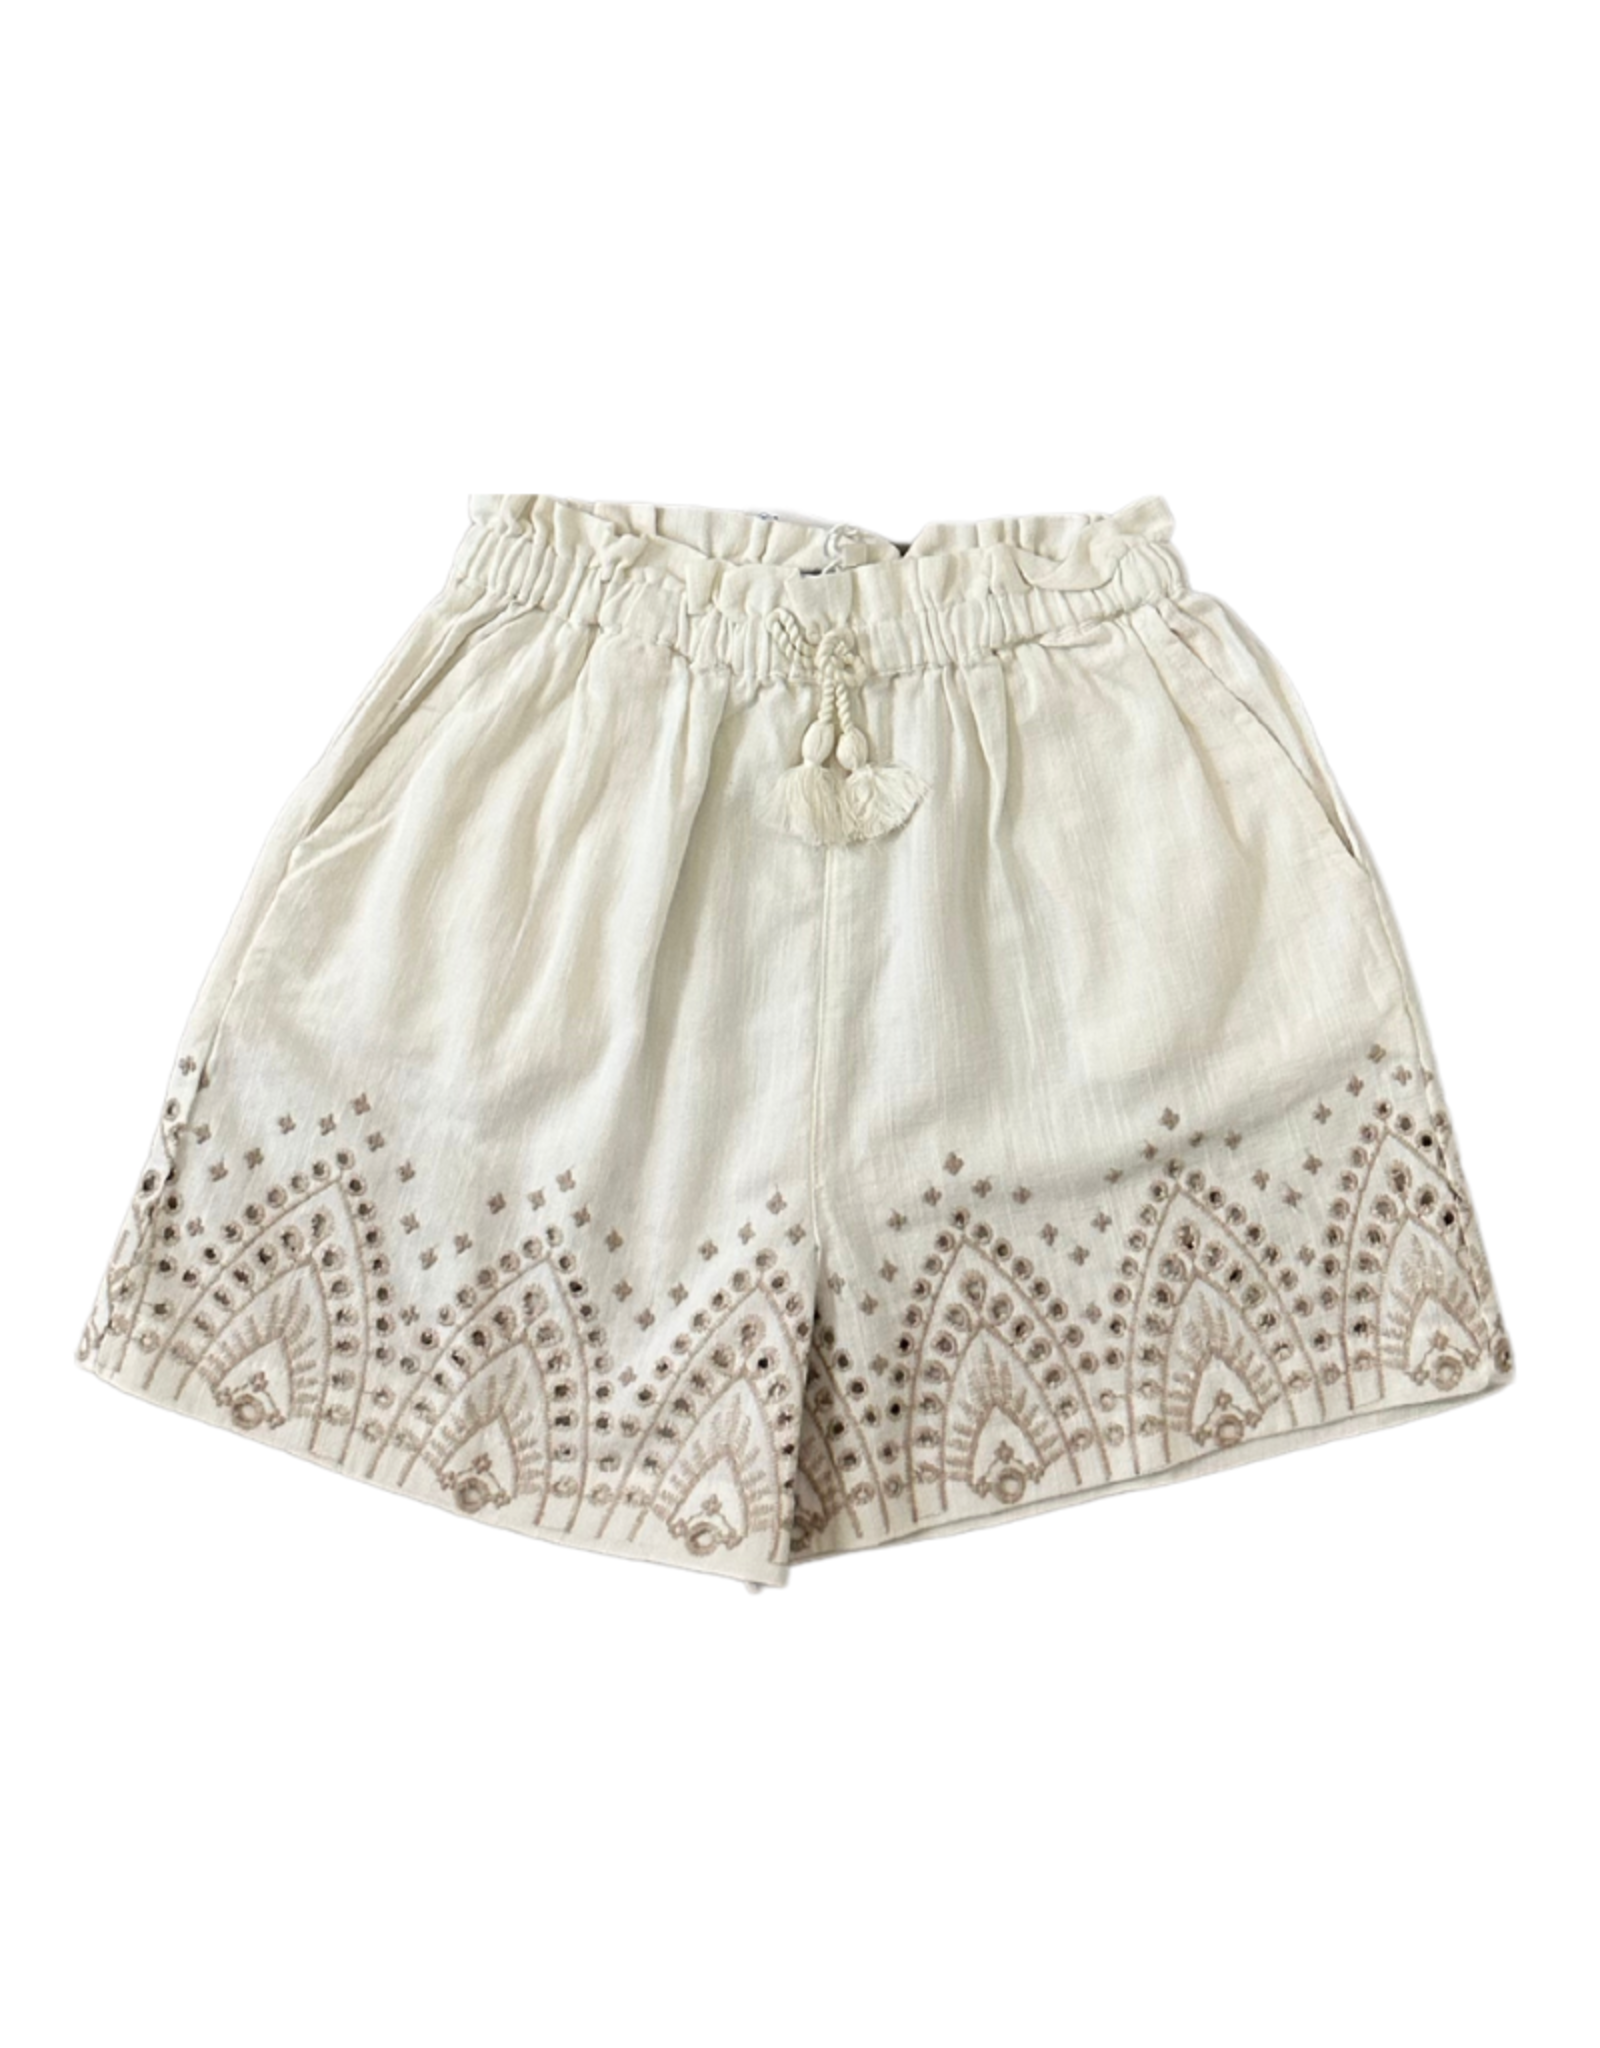 Mayoral Cream & Tan Embroidered Shorts